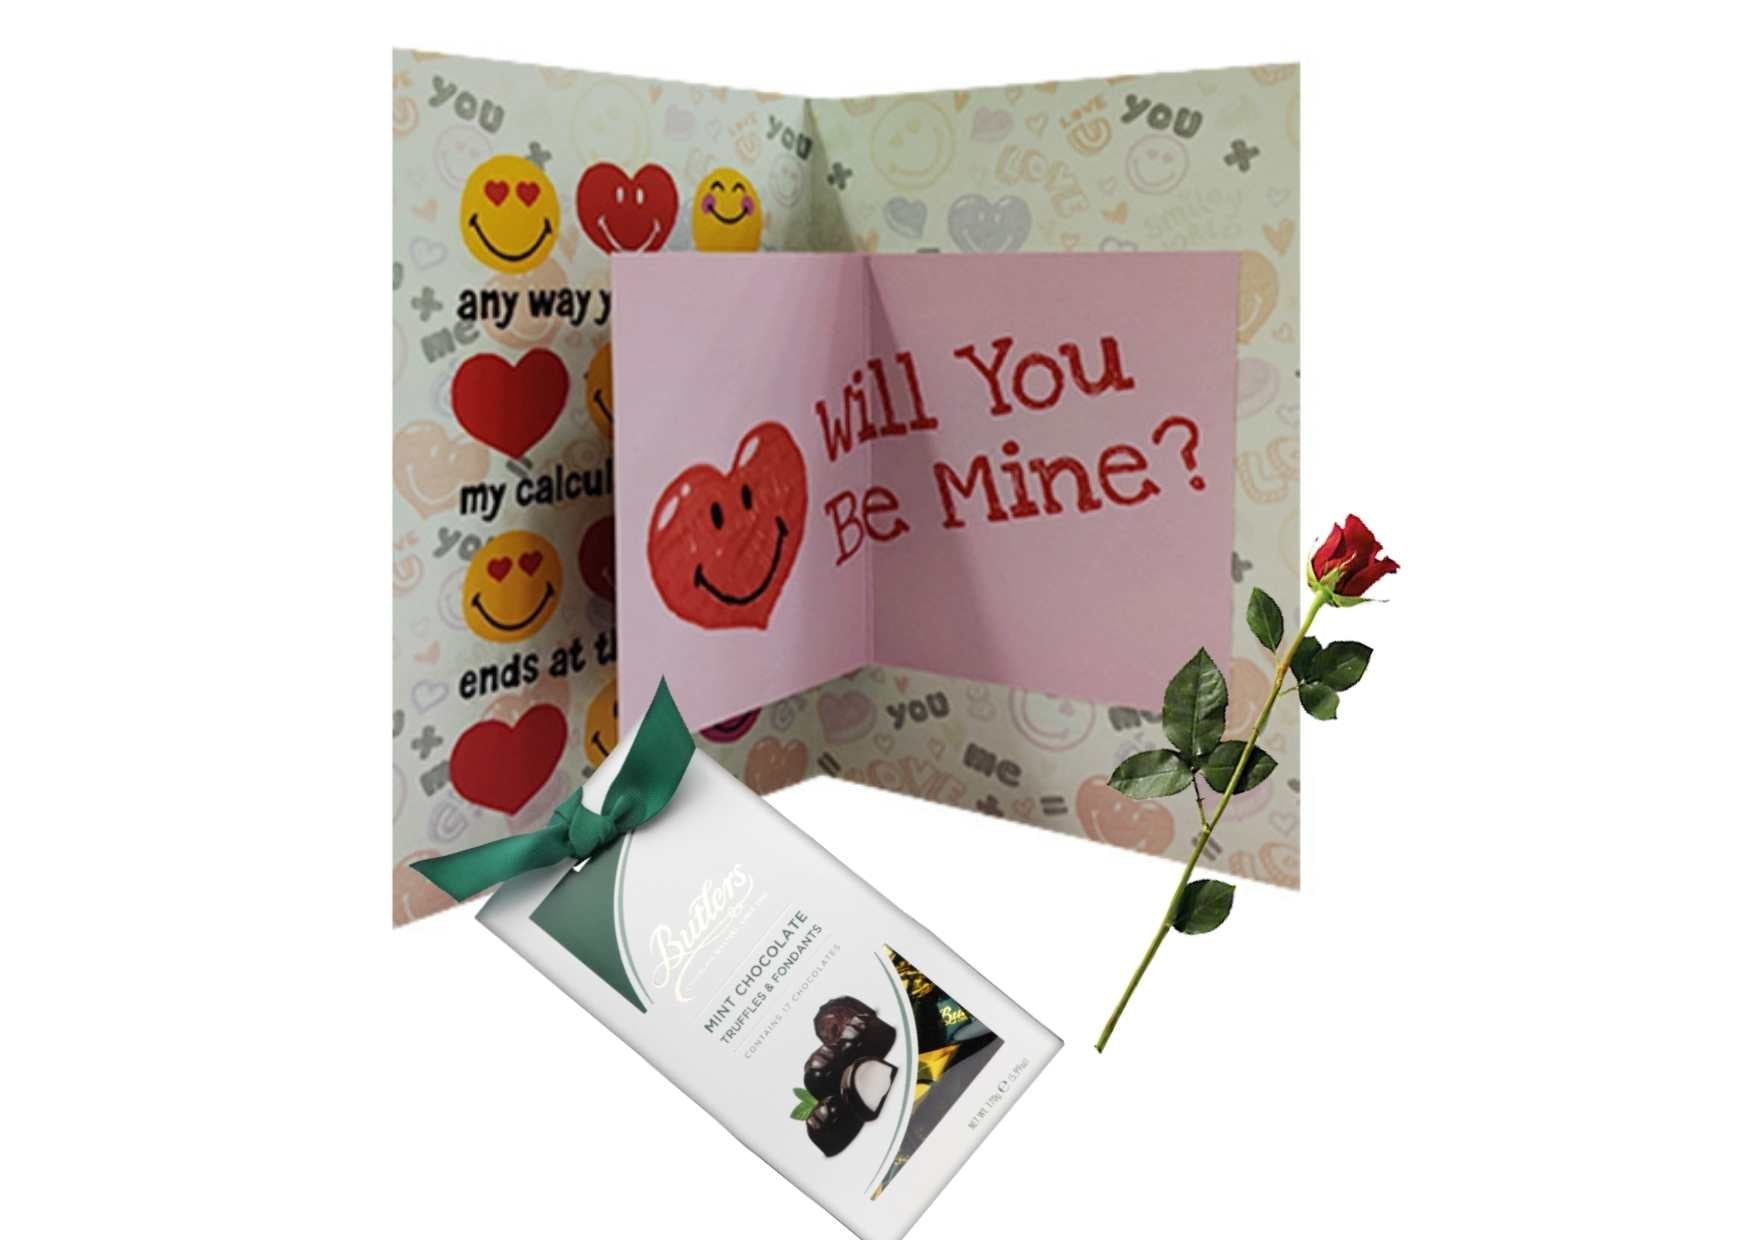 Archies | Archies You are mine multiple fold VALINTINE DAY' greeting Card WITH ARTIFICIAL RED ROSE AND BUTLERS MINT CHOCOLATE BOX